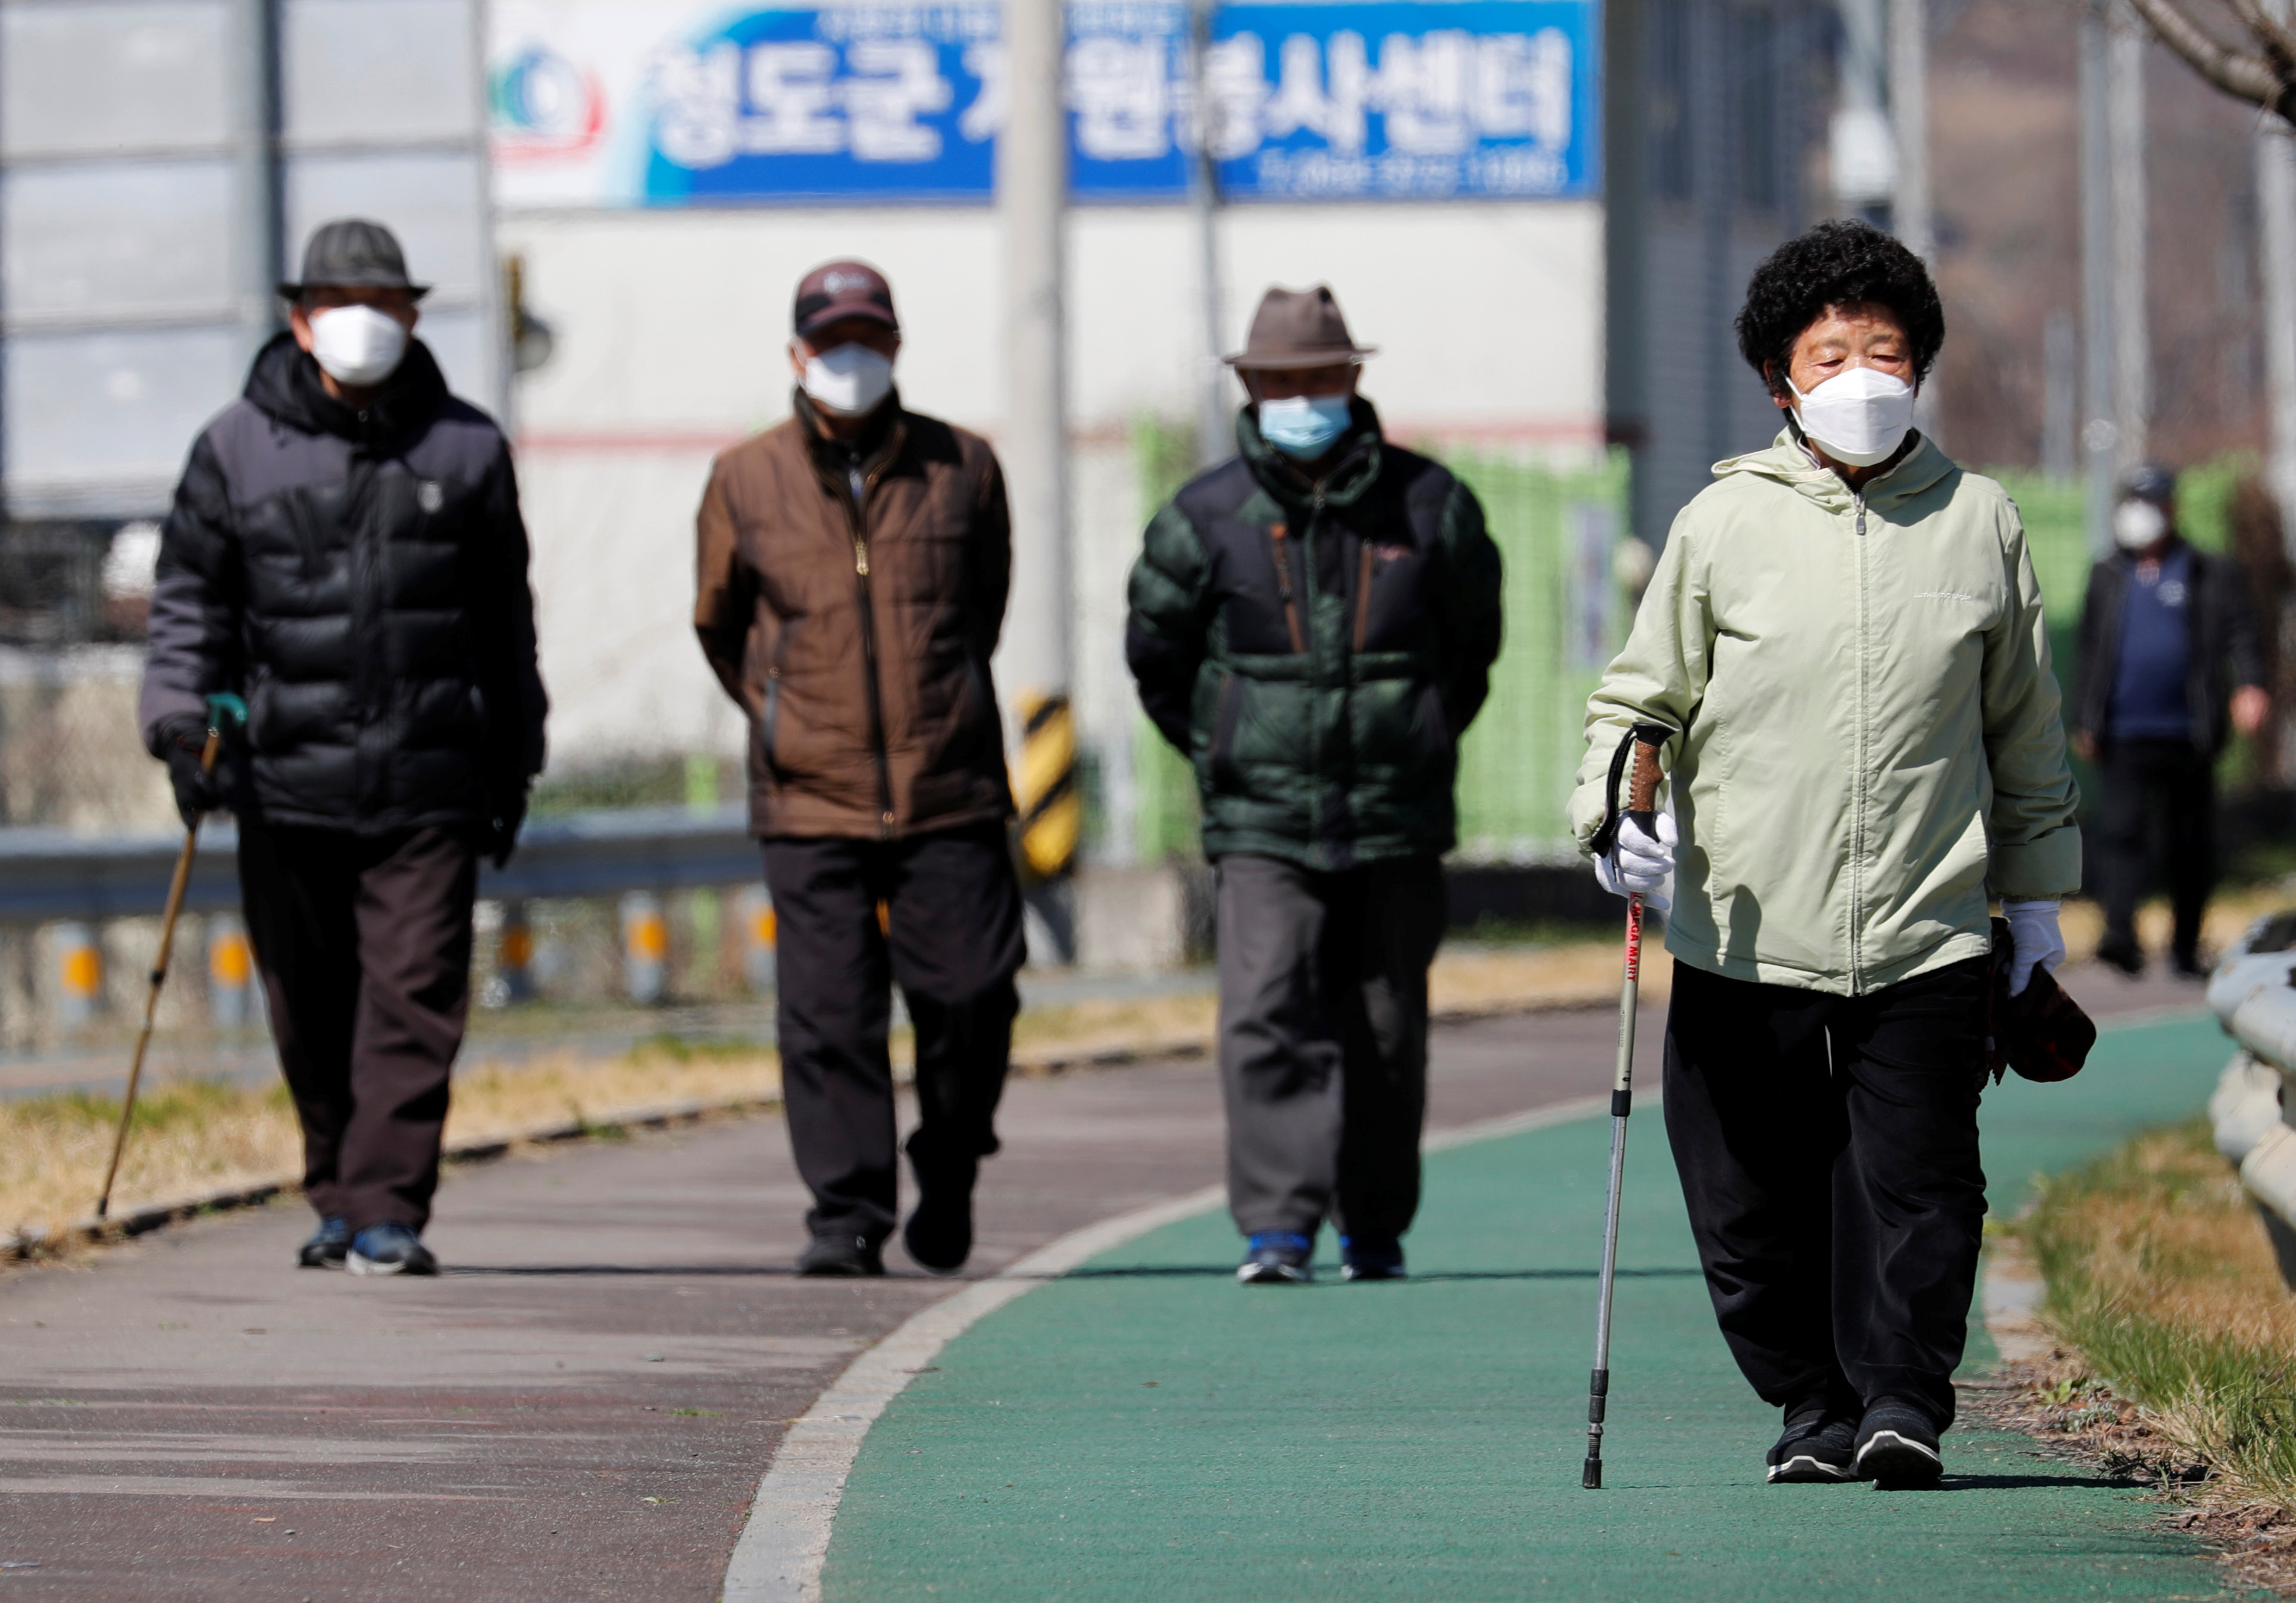 People wearing protective face masks following an outbreak of coronavirus disease (COVID-19), follow a trail in Cheongdo county